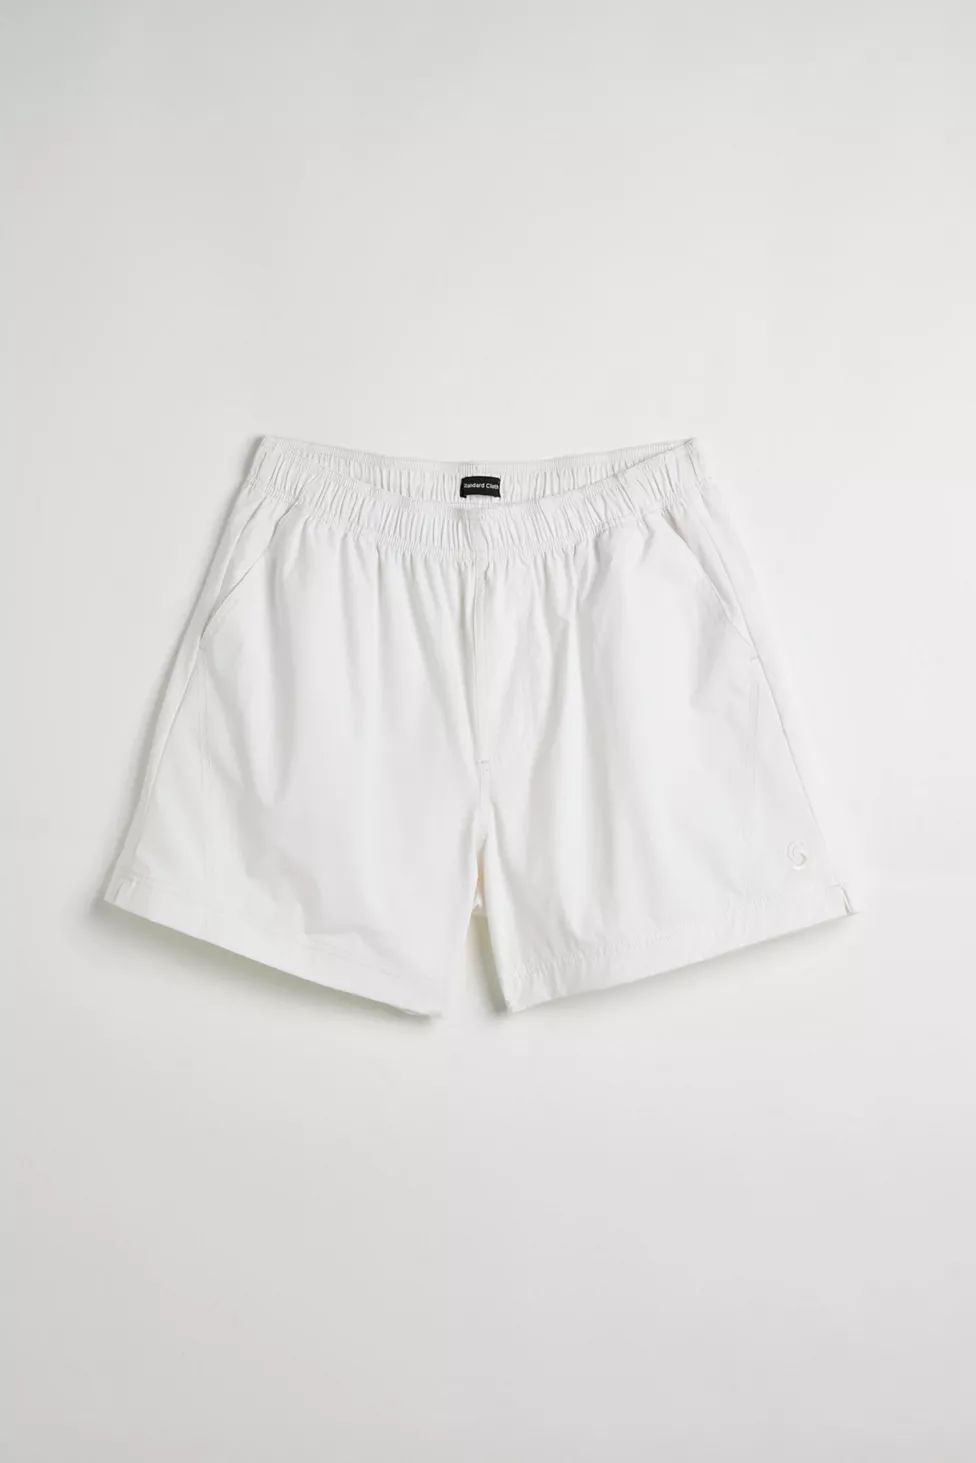 Standard Cloth Ryder 5" Nylon Short | Urban Outfitters (US and RoW)